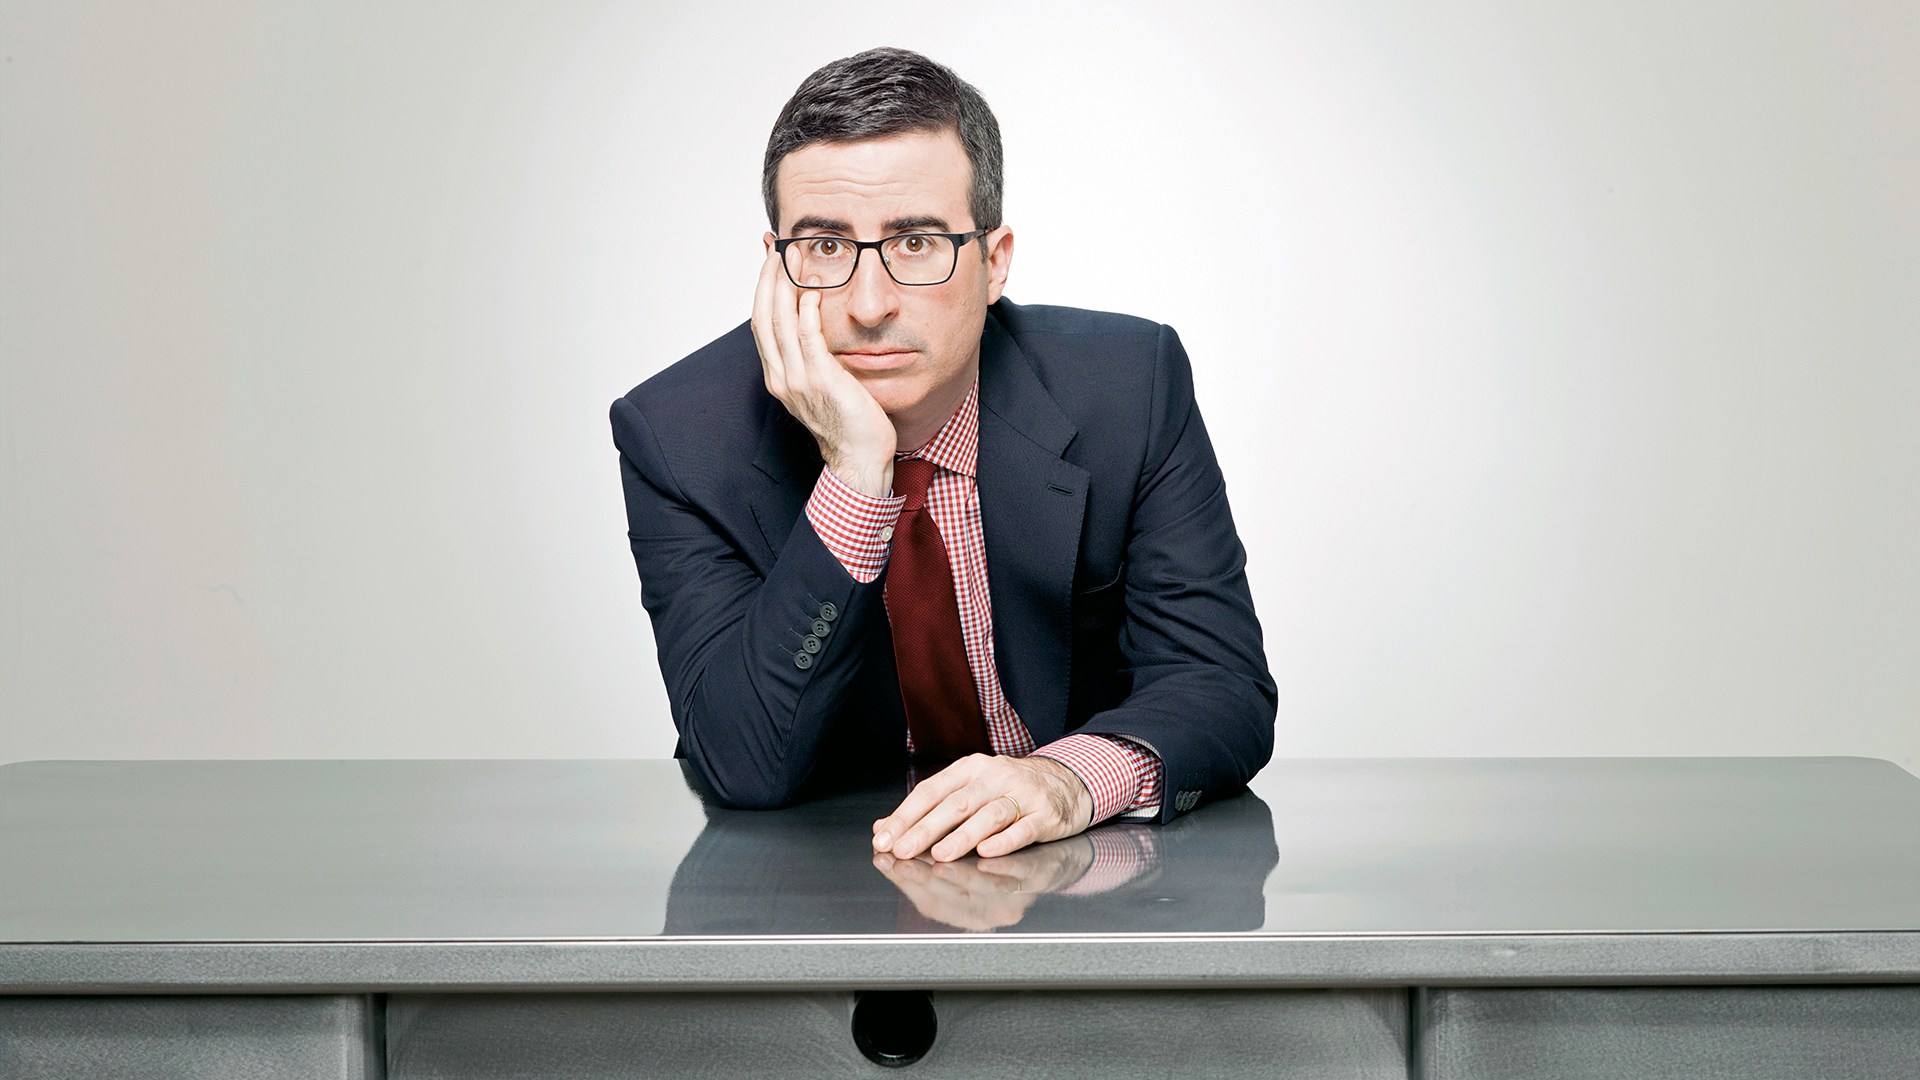 TV Show Last Week Tonight with John Oliver HD Wallpaper | Background Image